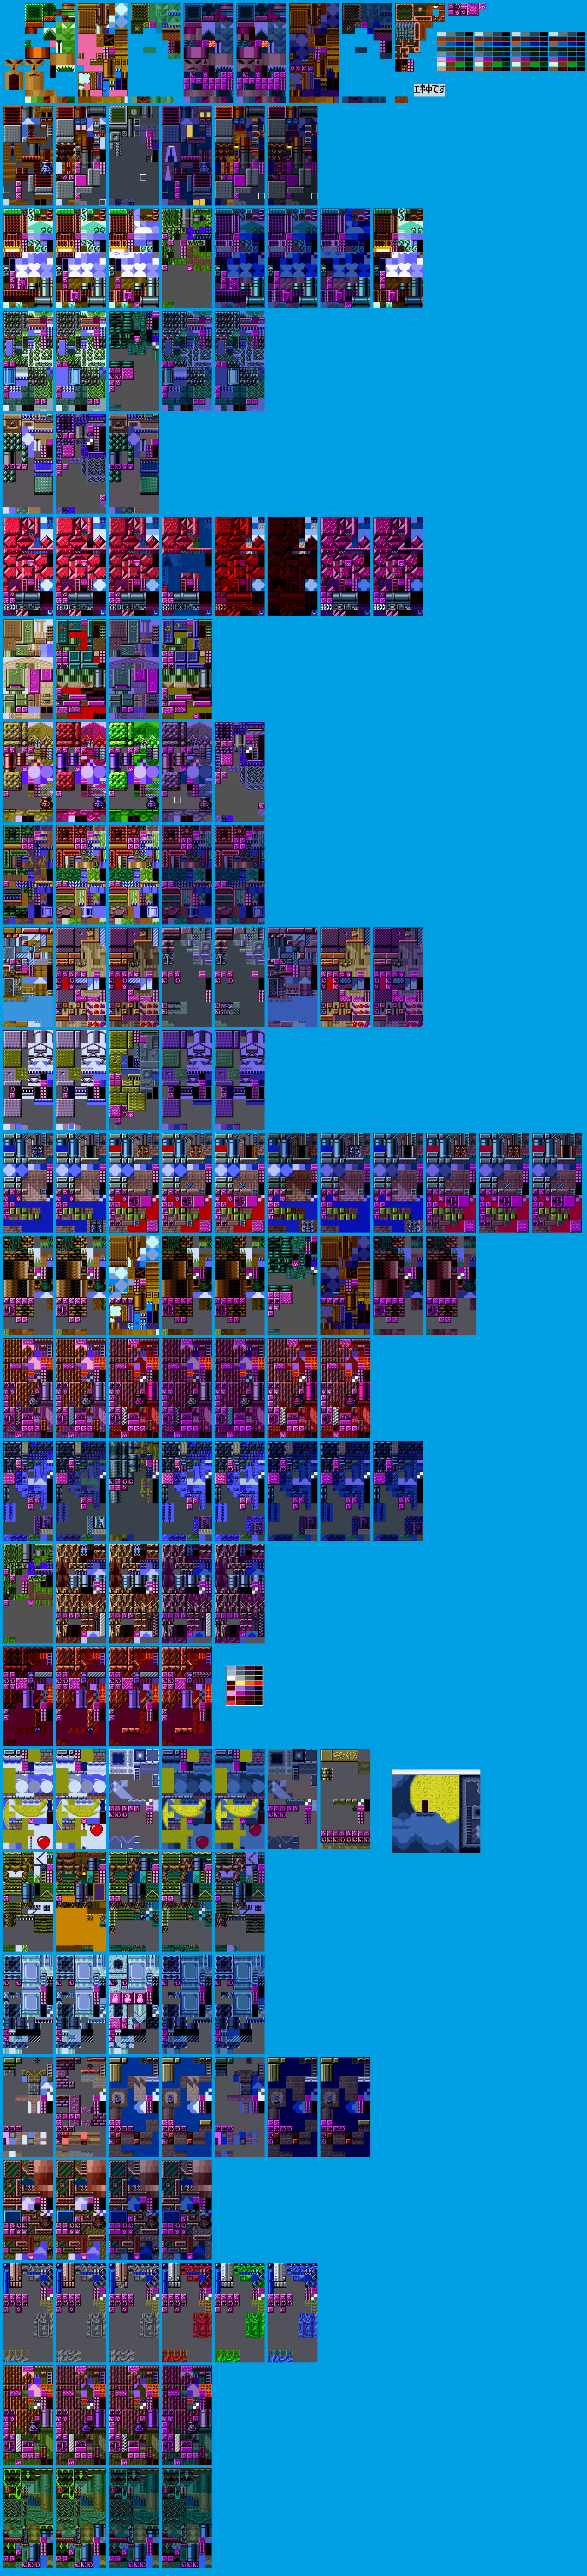 Tilesets.png